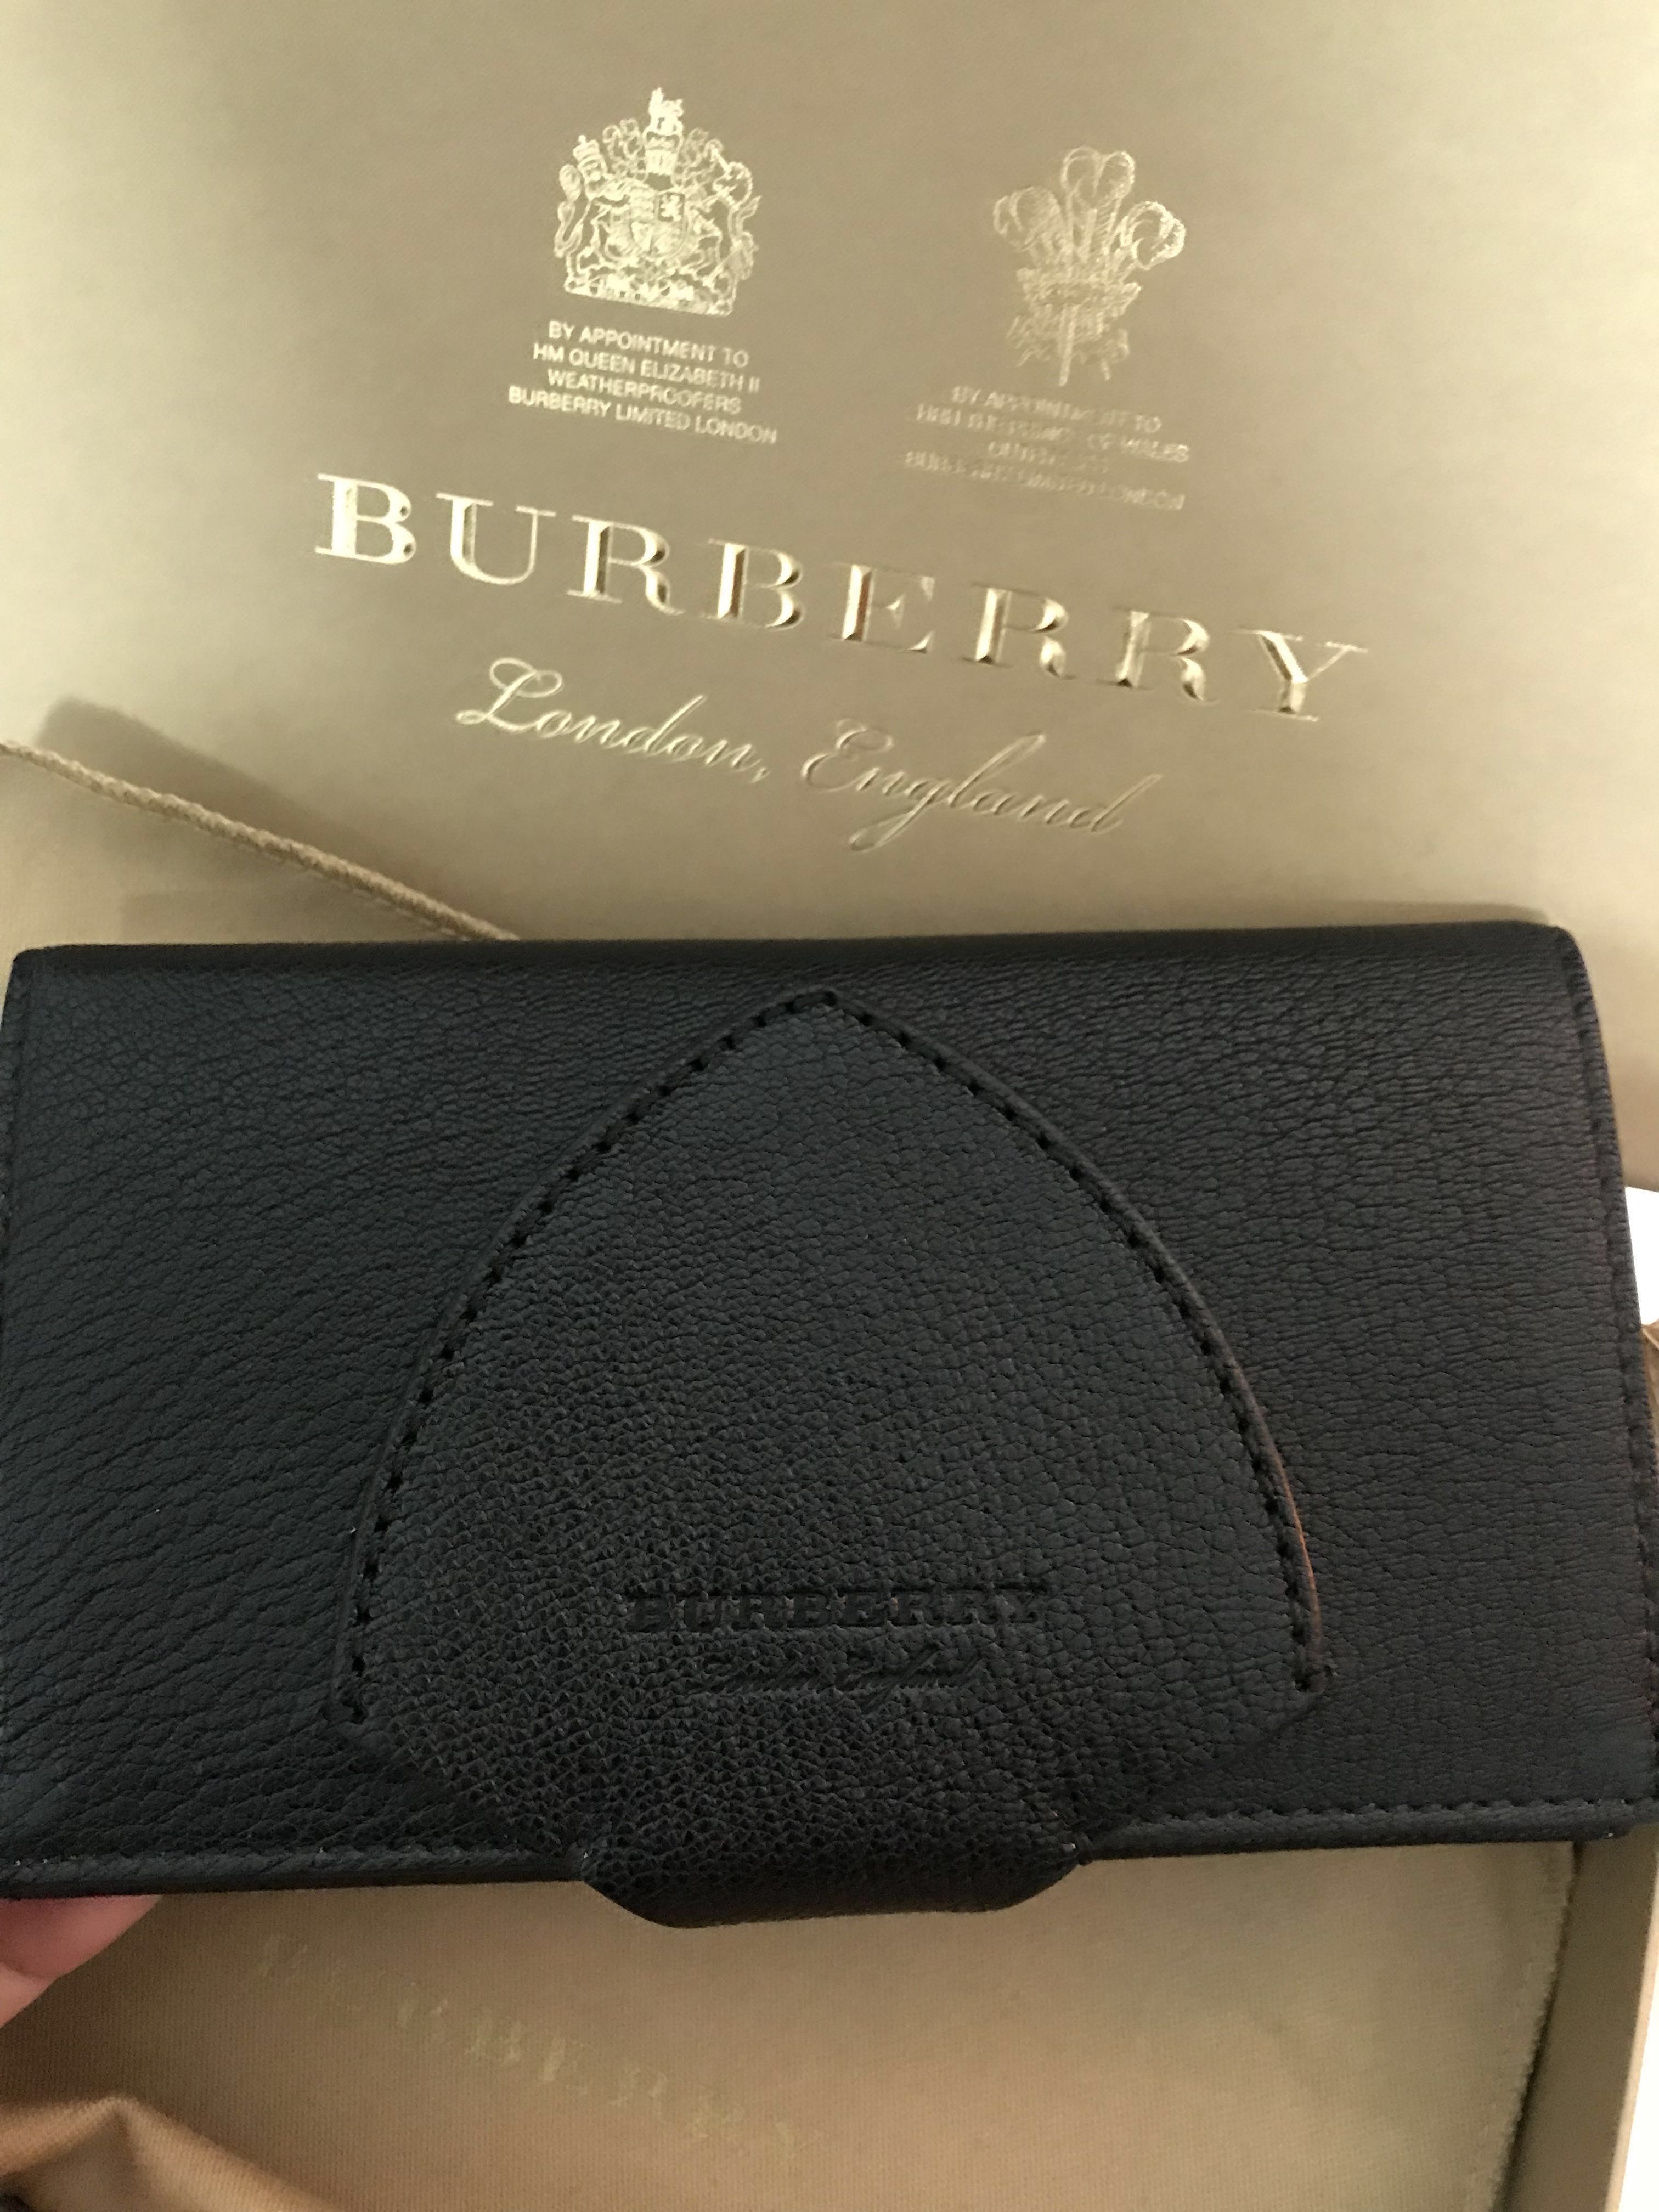 burberry equestrian shield leather wallet